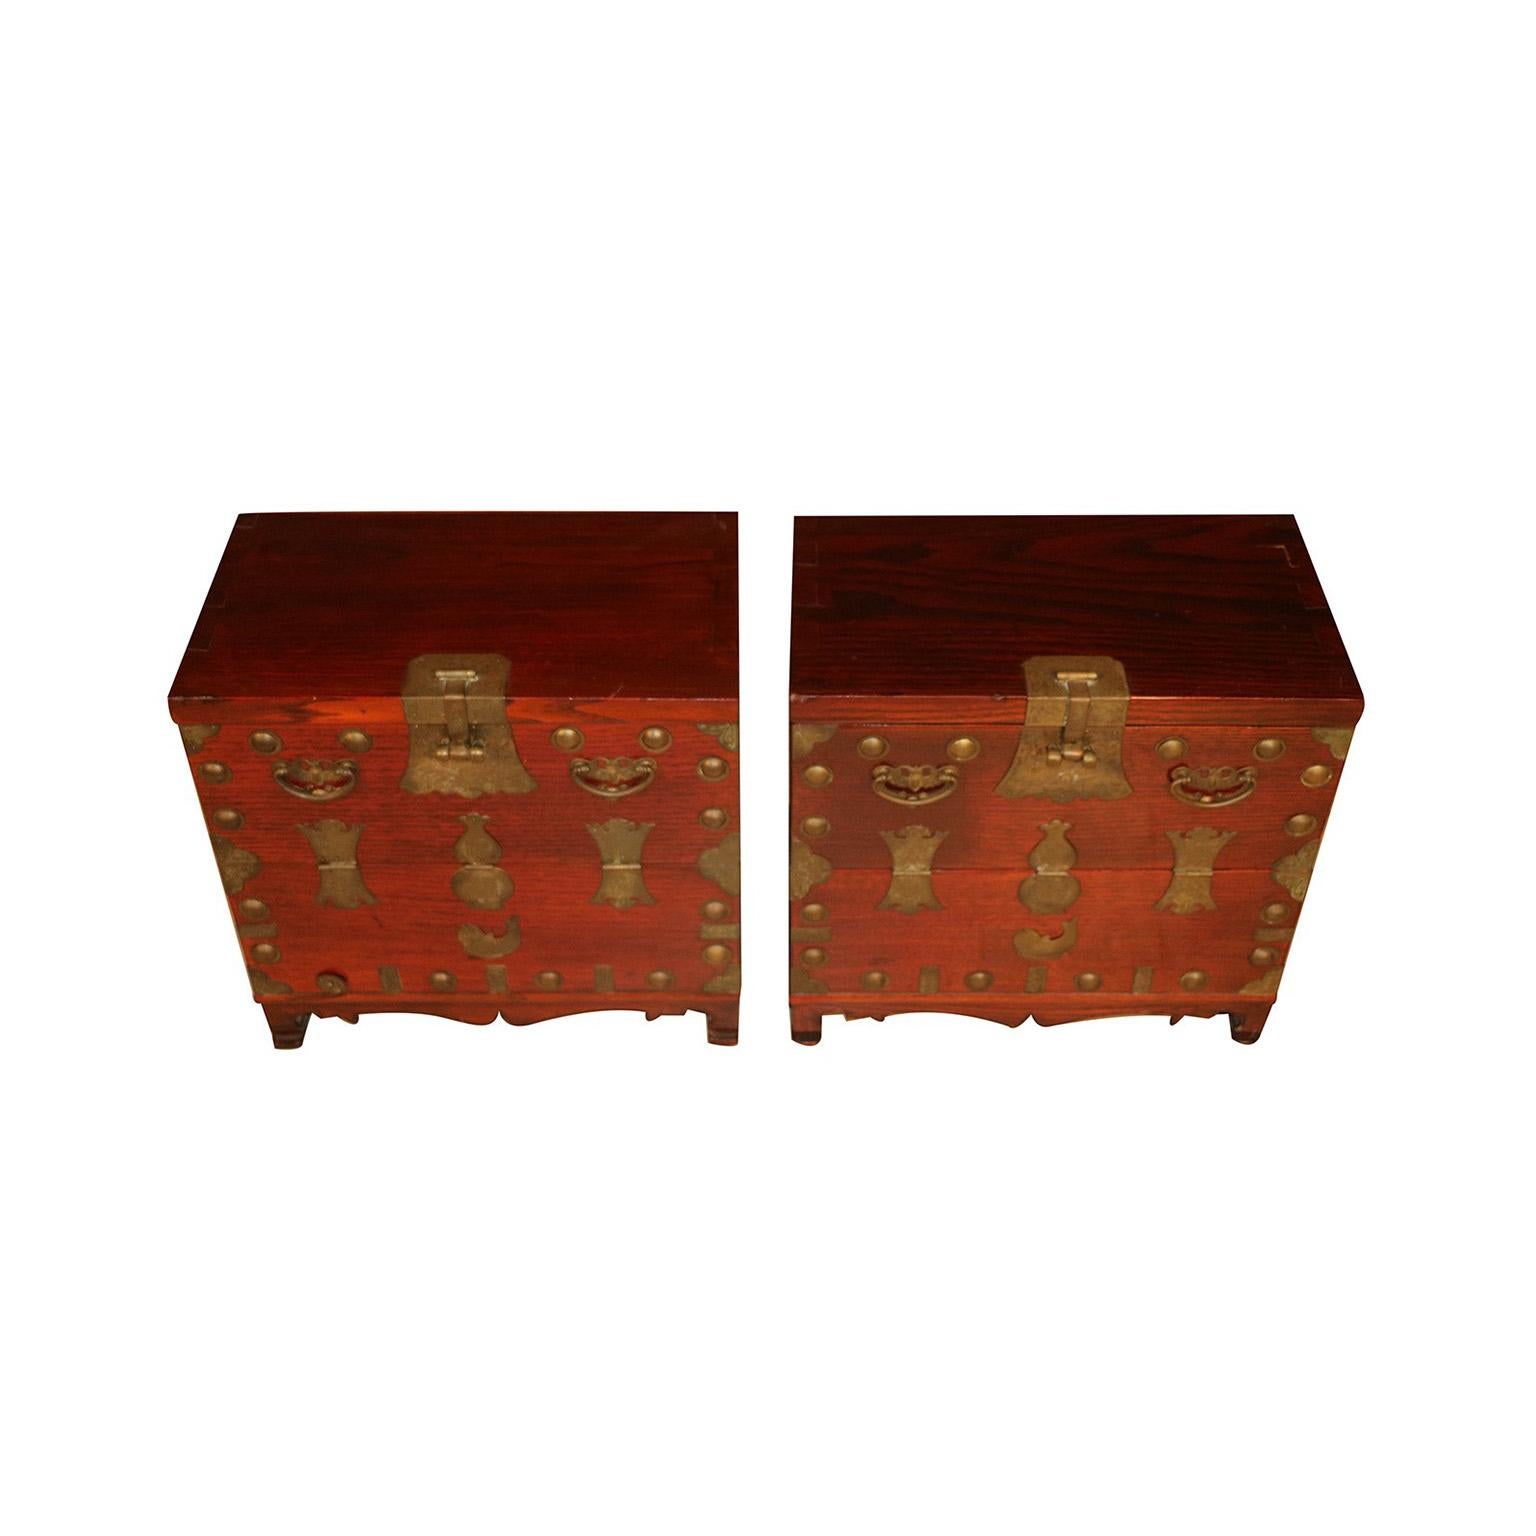 A remarkable pair of antique Korean elm small chests, with original brass hardware, circa late 19th century. Featuring richly grained wood, beautifully engraved brass hardware and lovely adornments. Framed by brass corner accents and round, studded